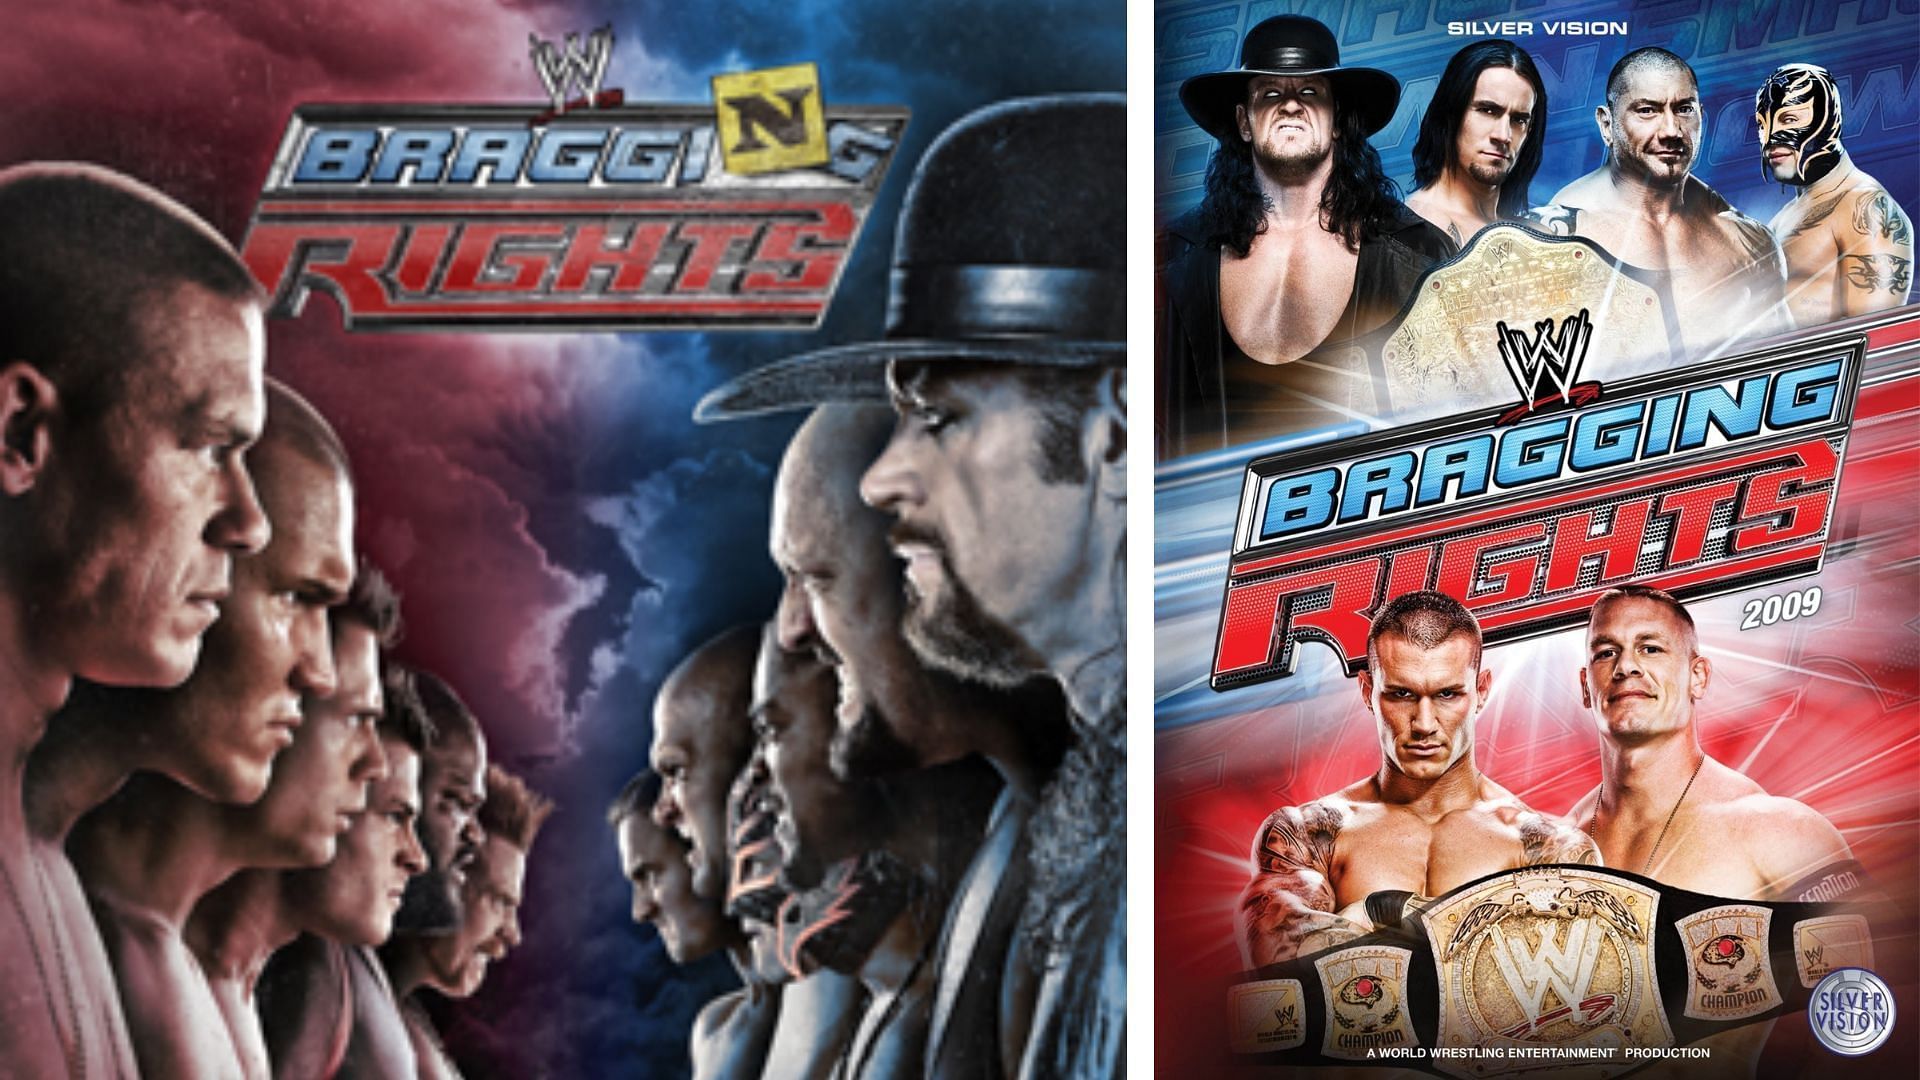 Bragging Rights had two installments - 2009 and 2010 editions.